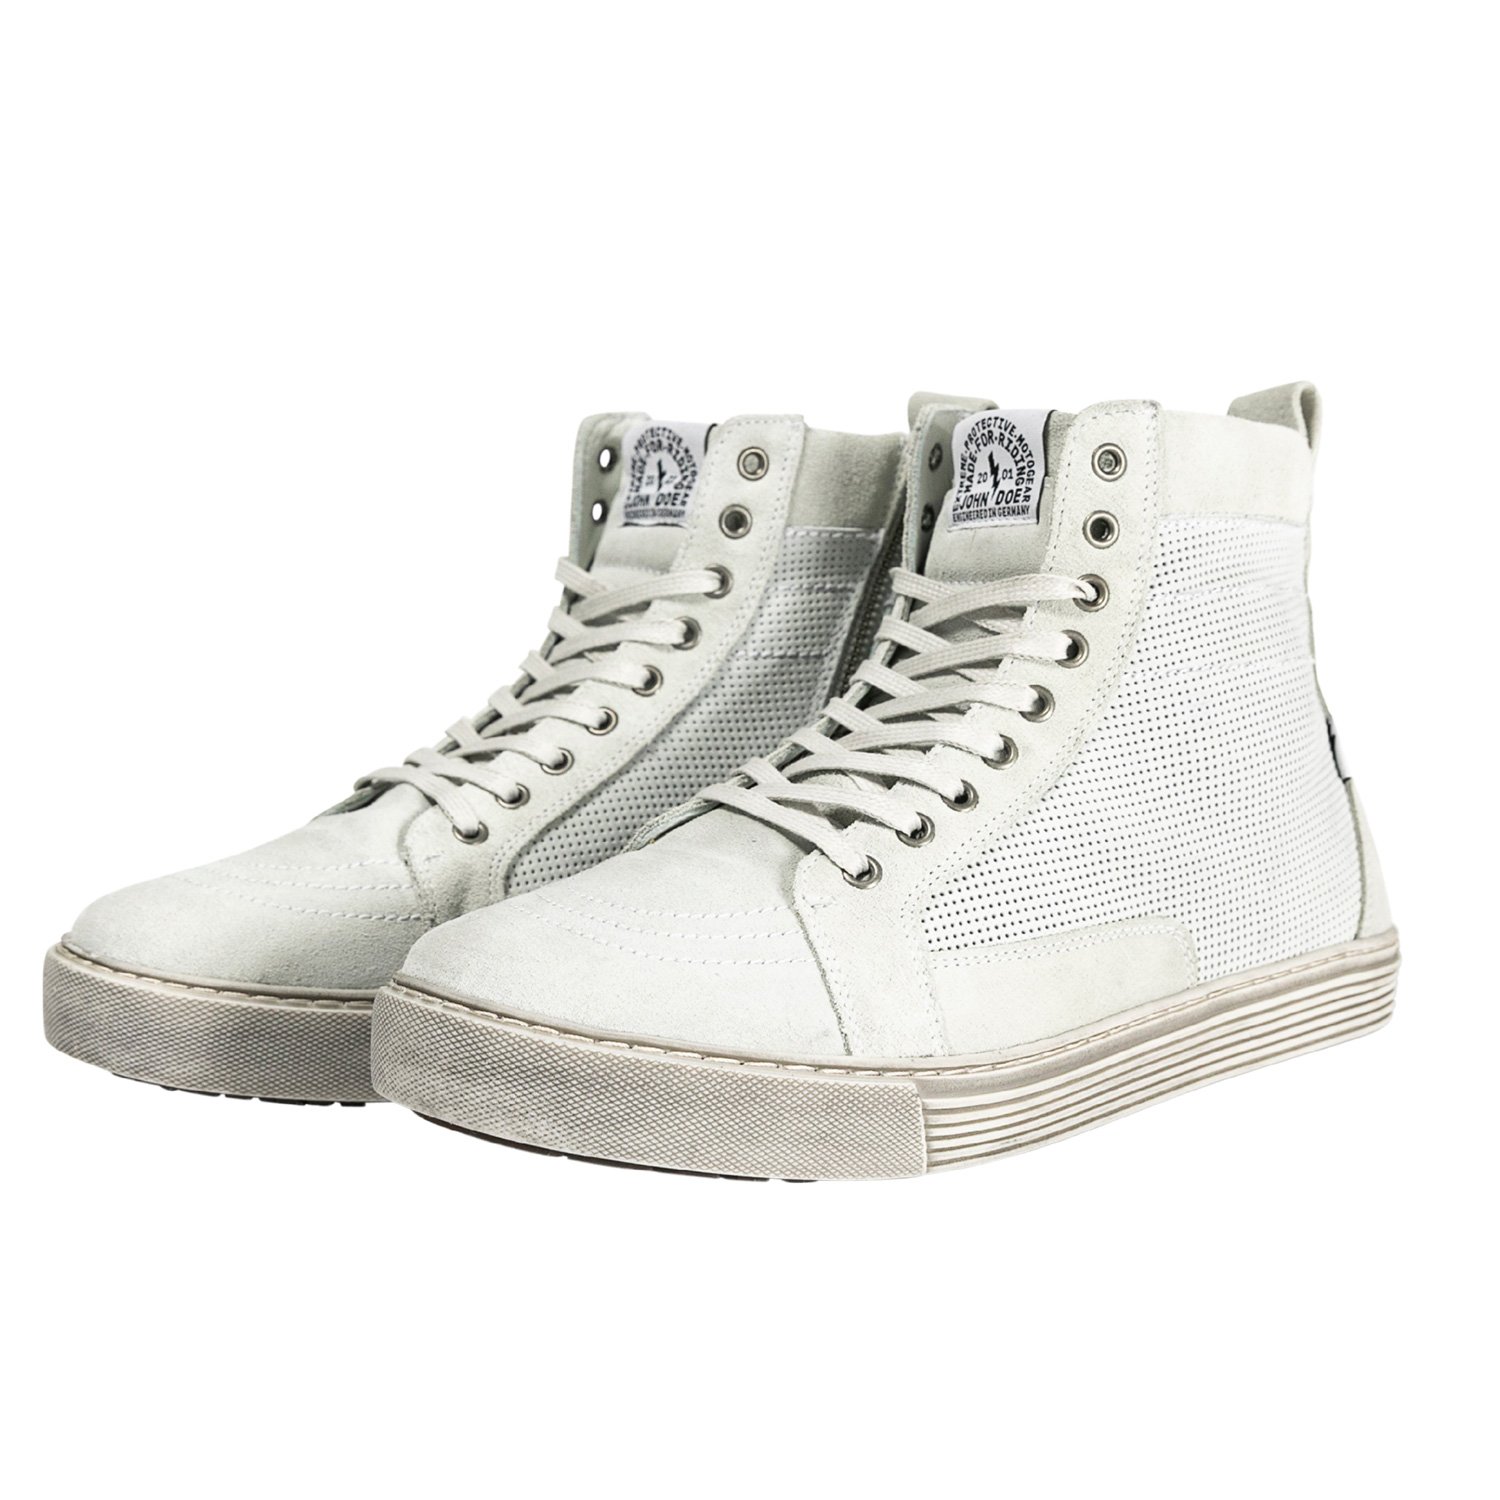 Image of John Doe Neo Blanc Chaussures Taille 425